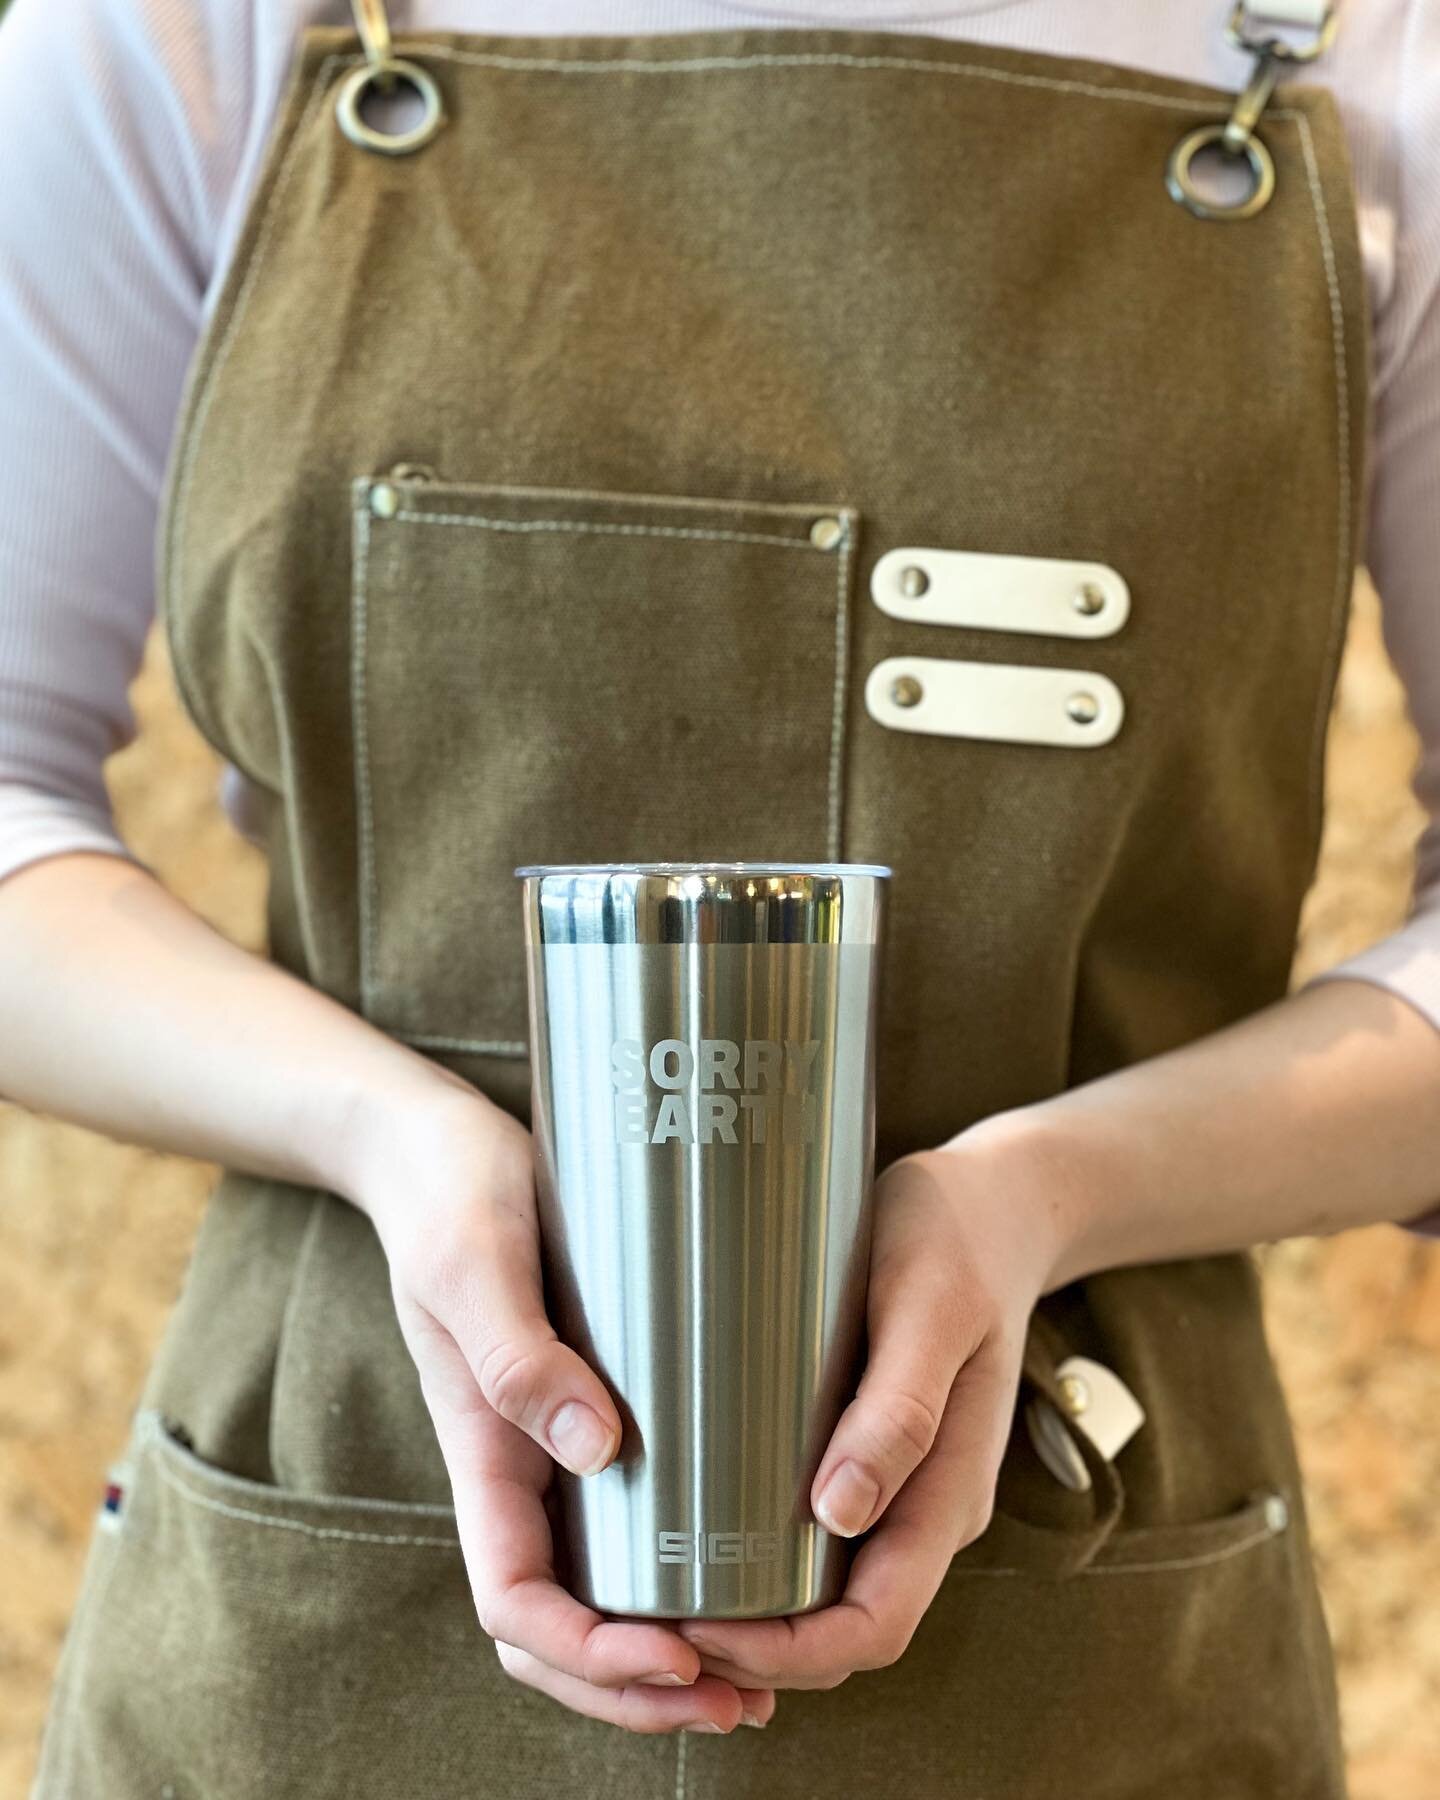 🌎 SORRY EARTH 🌎 

Our new SIGG travel mugs have arrived and we love their message.

Today we crossed the 30,000 cups saved mark and we have all of you to thank for making this possible. 

@siggswitzerland 
.
.
.
#nomad 
#nomadyvr
#byoc 
#sigg 
#reu